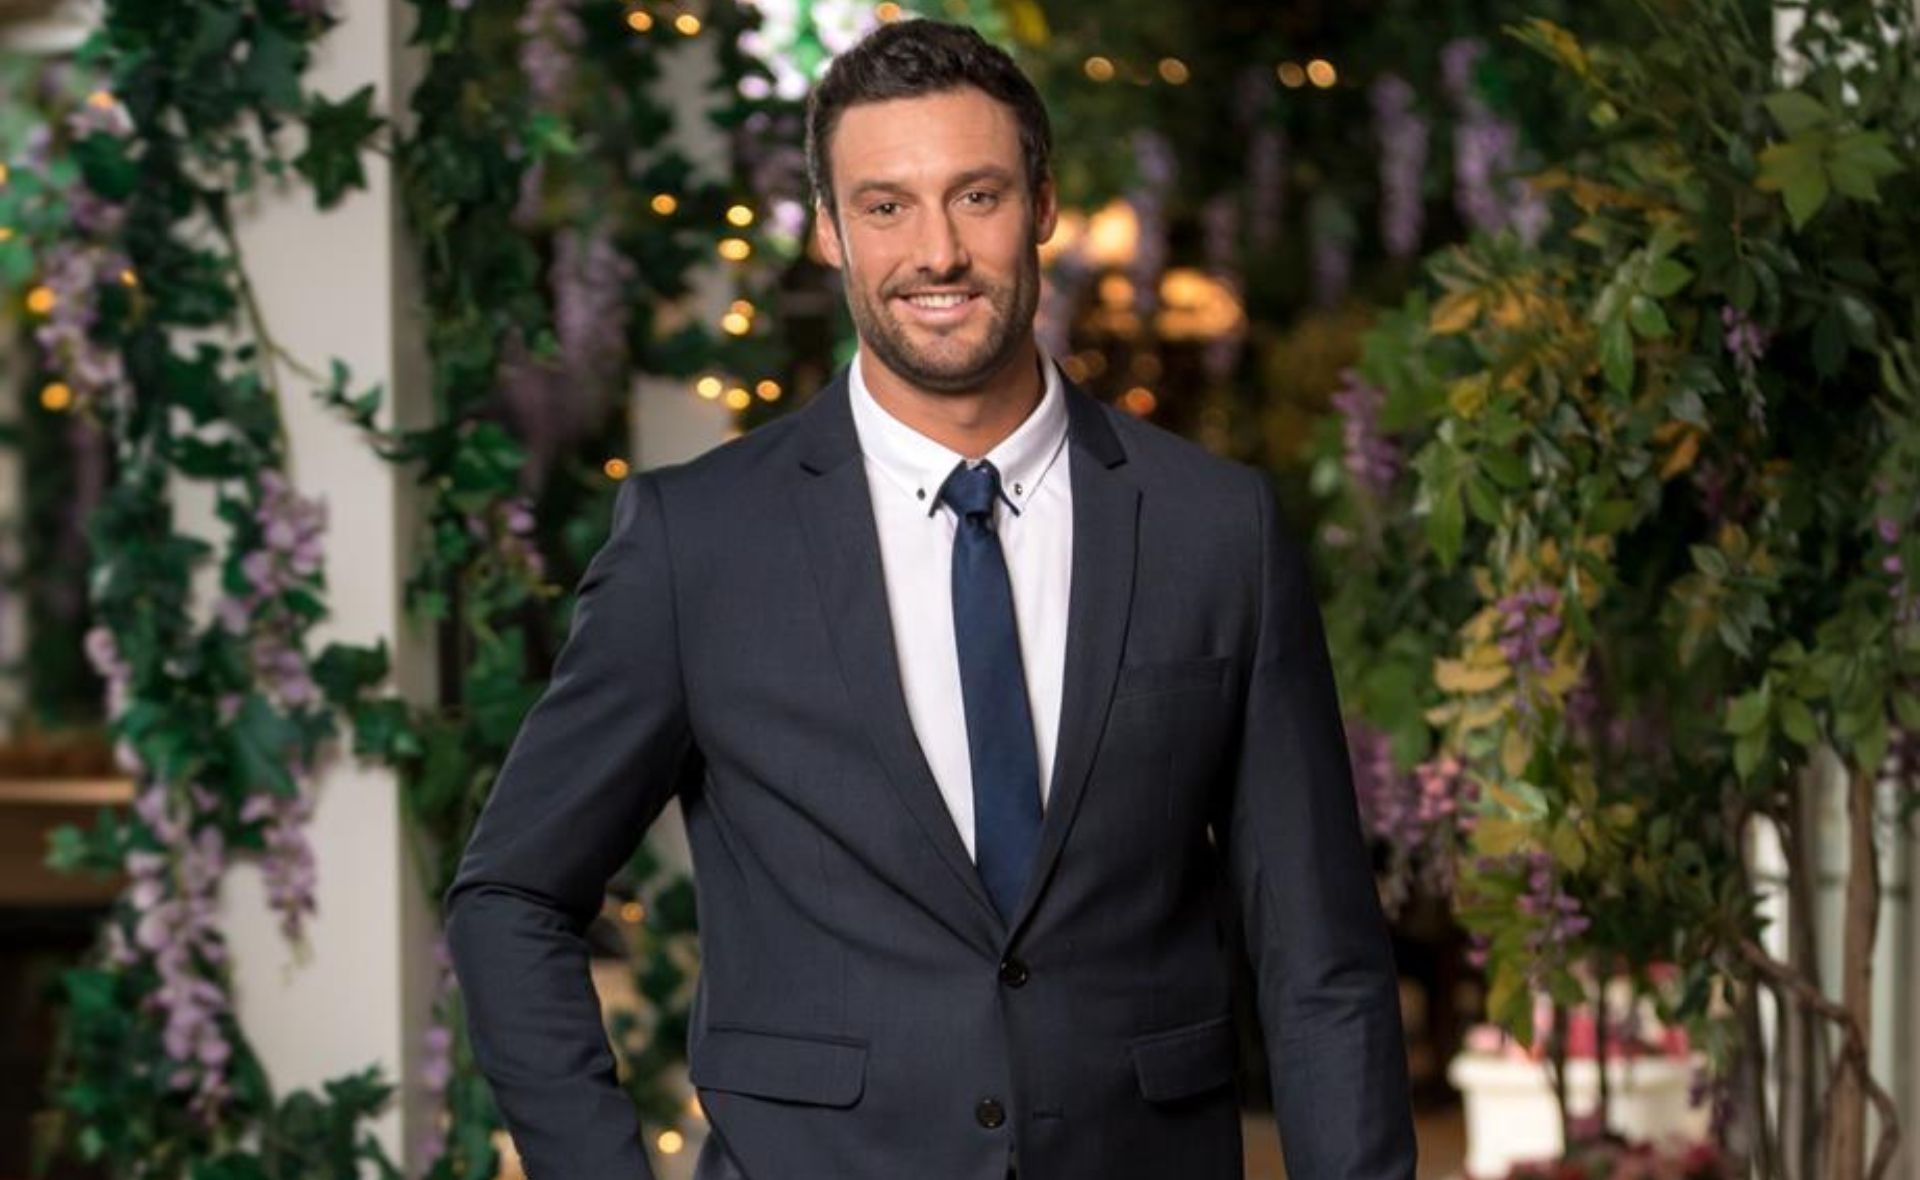 Former Bachelorette star is charged after threatening to kill his stepdad in chilling text messages